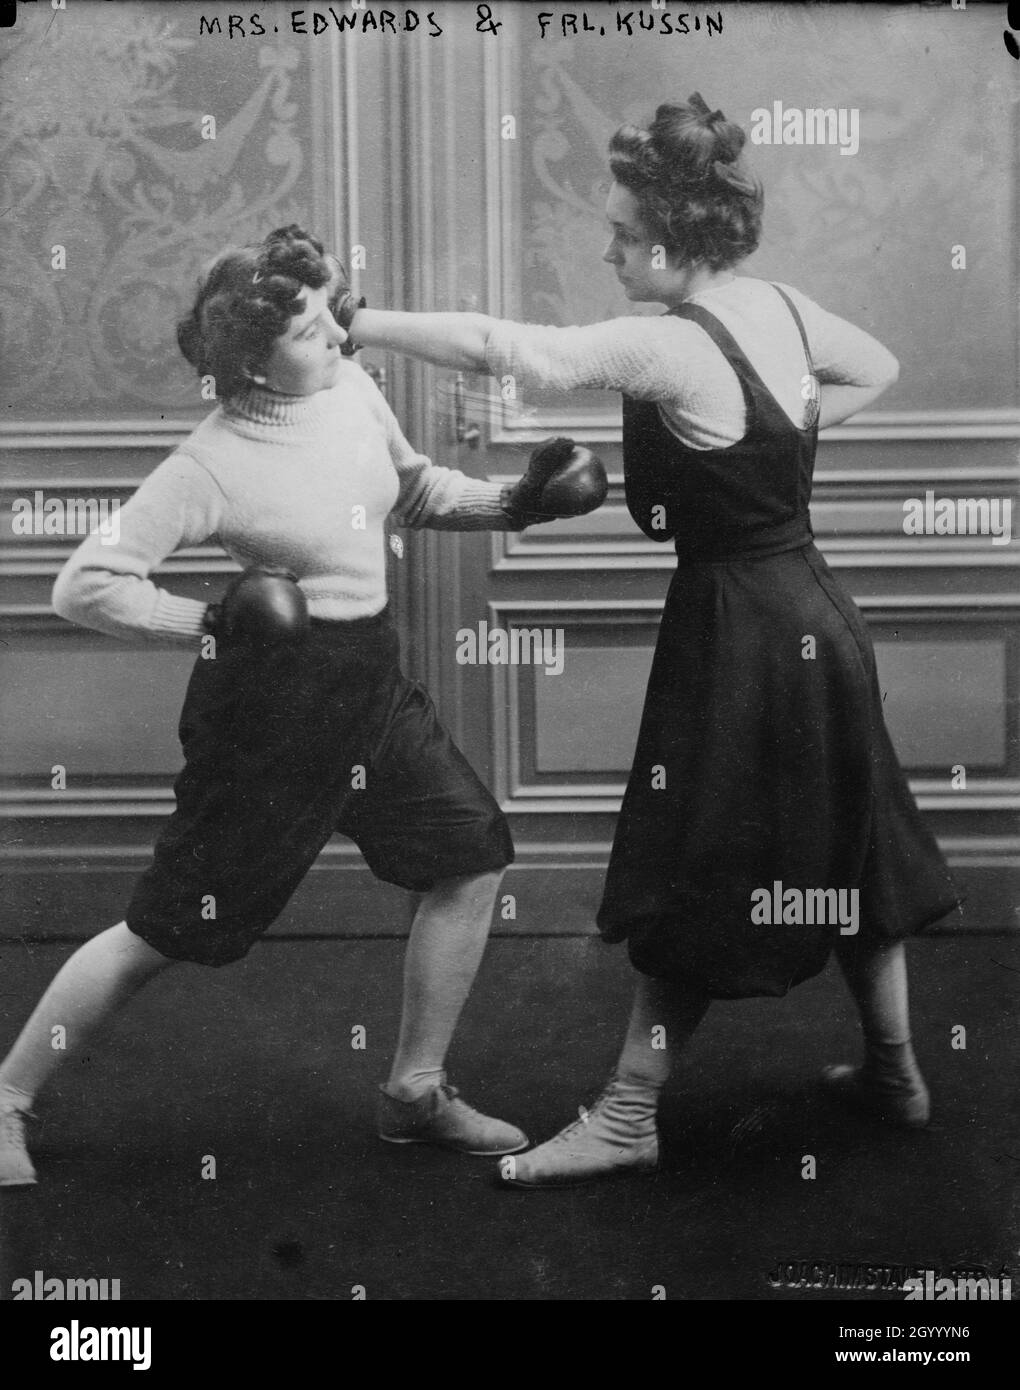 Photo shows Fraulein Kussin (right) and Mrs. Edwards (left) who had a boxing match on March 7, 1912. Stock Photo